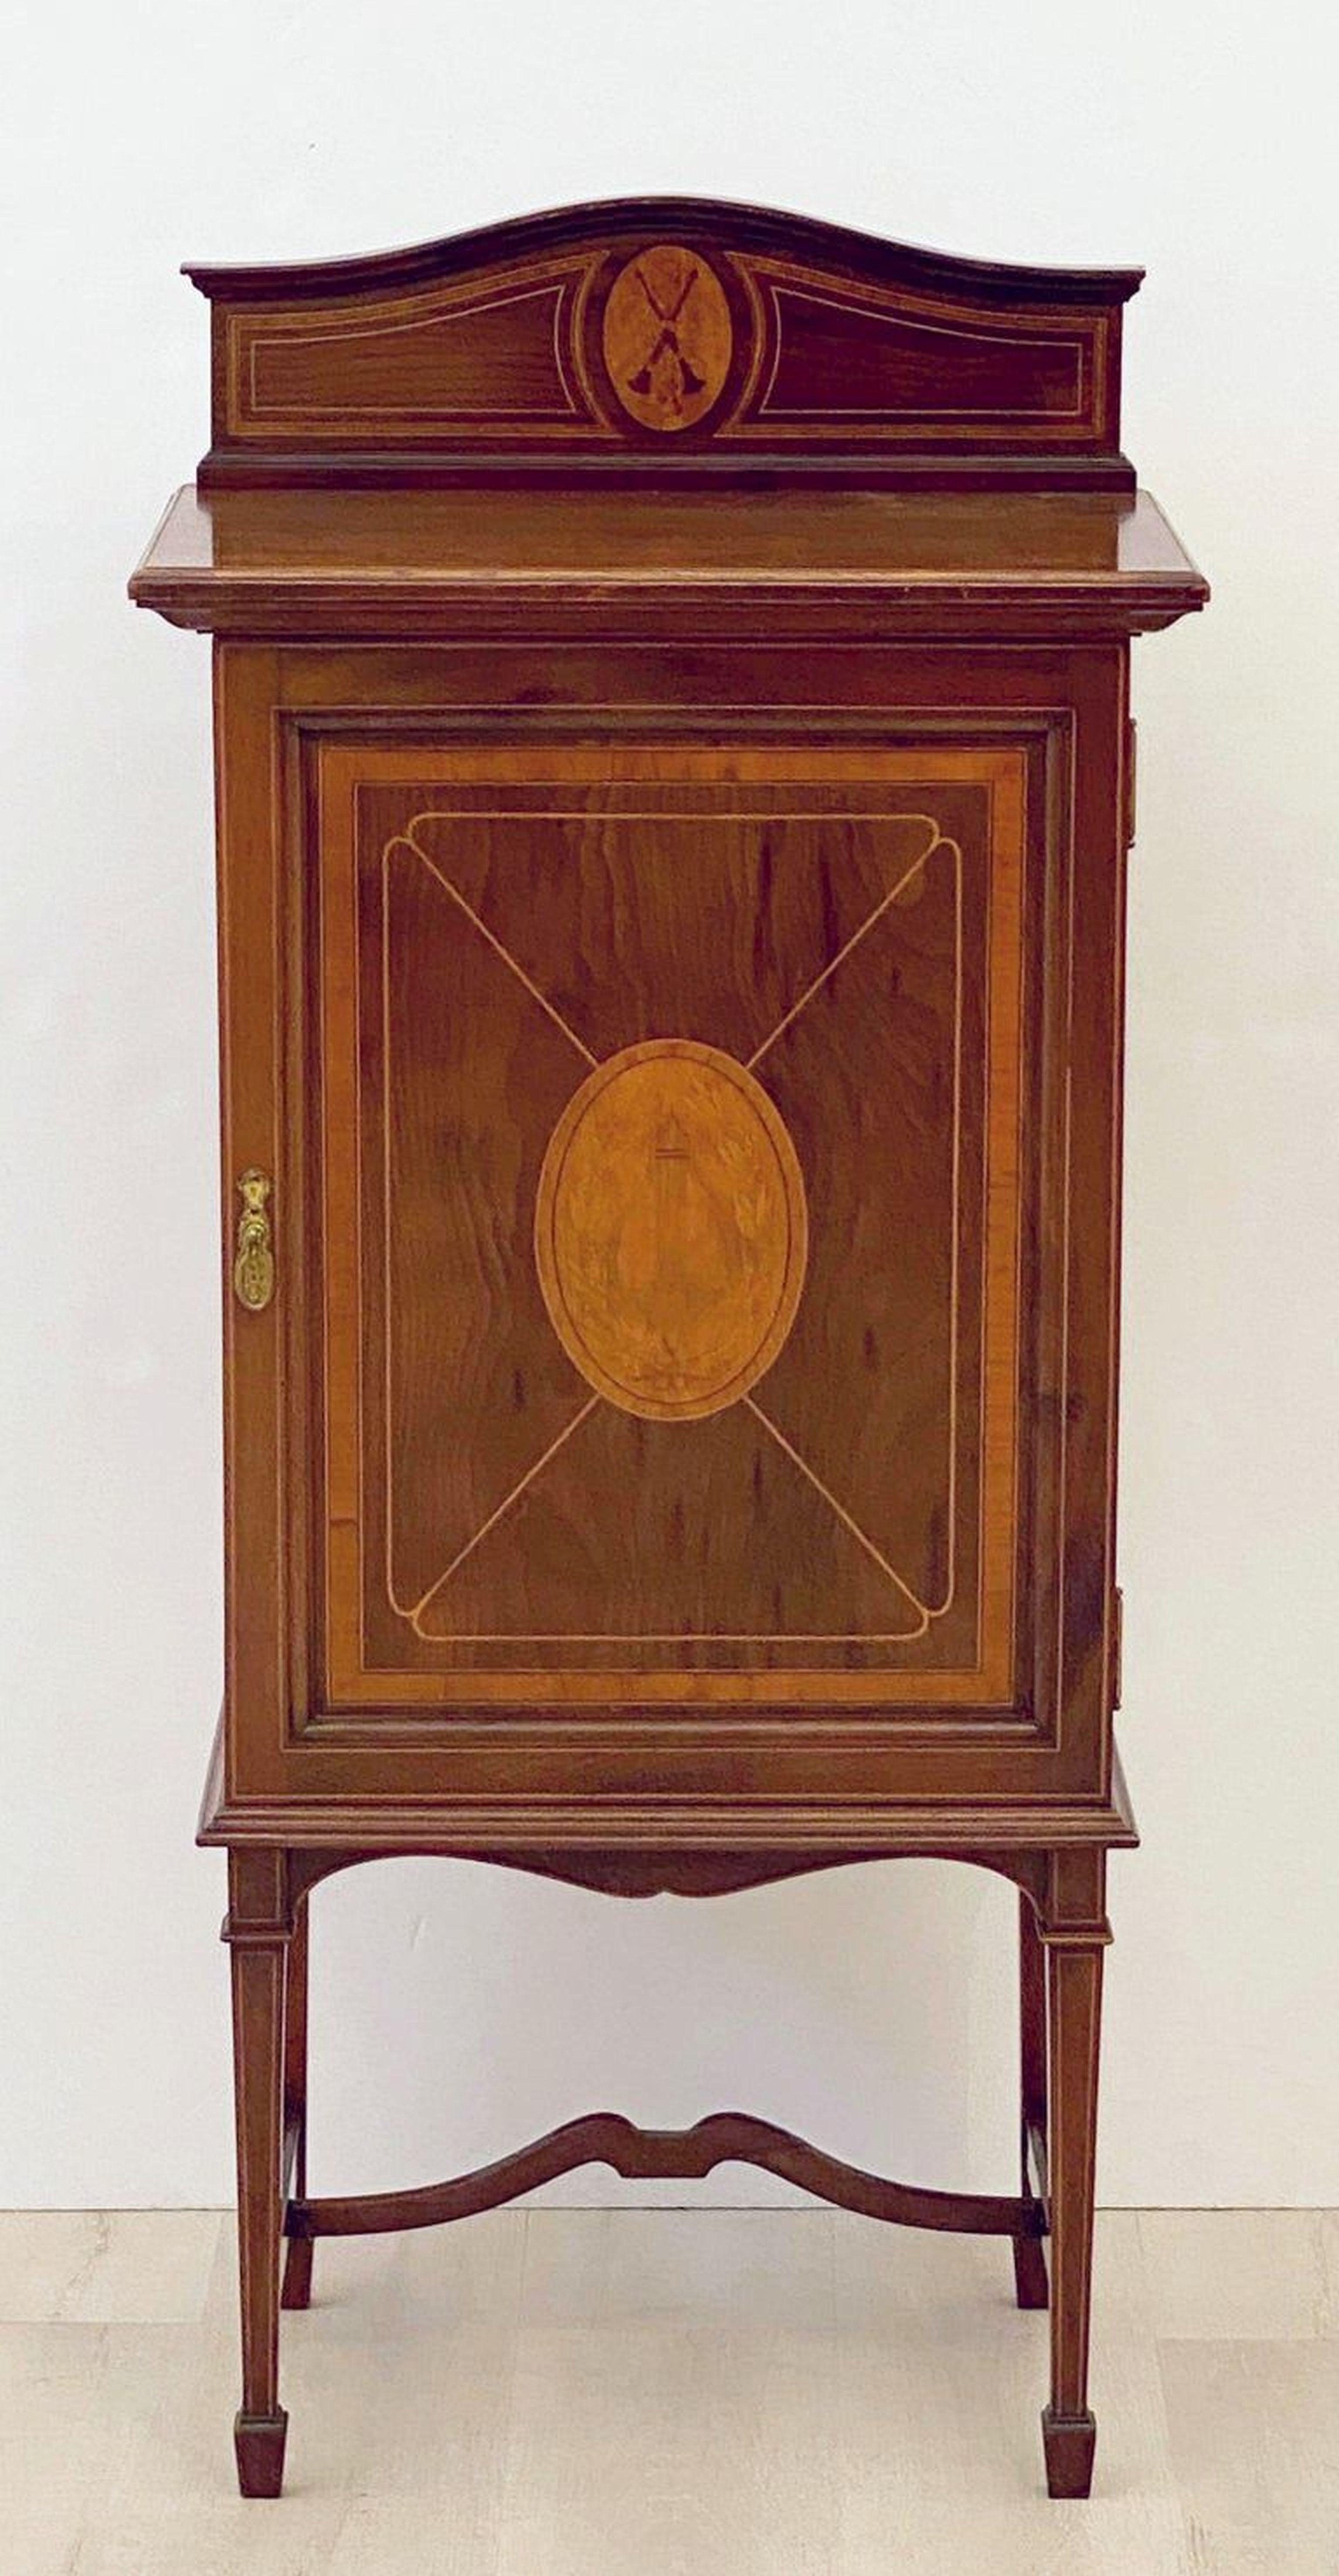 A fine English music cabinet or cupboard of inlaid mahogany from the Edwardian era, featuring a moulded top with shaped back panel and inlaid design of two wind instruments in a center cartouche, over a cupboard with paneled door. The door with